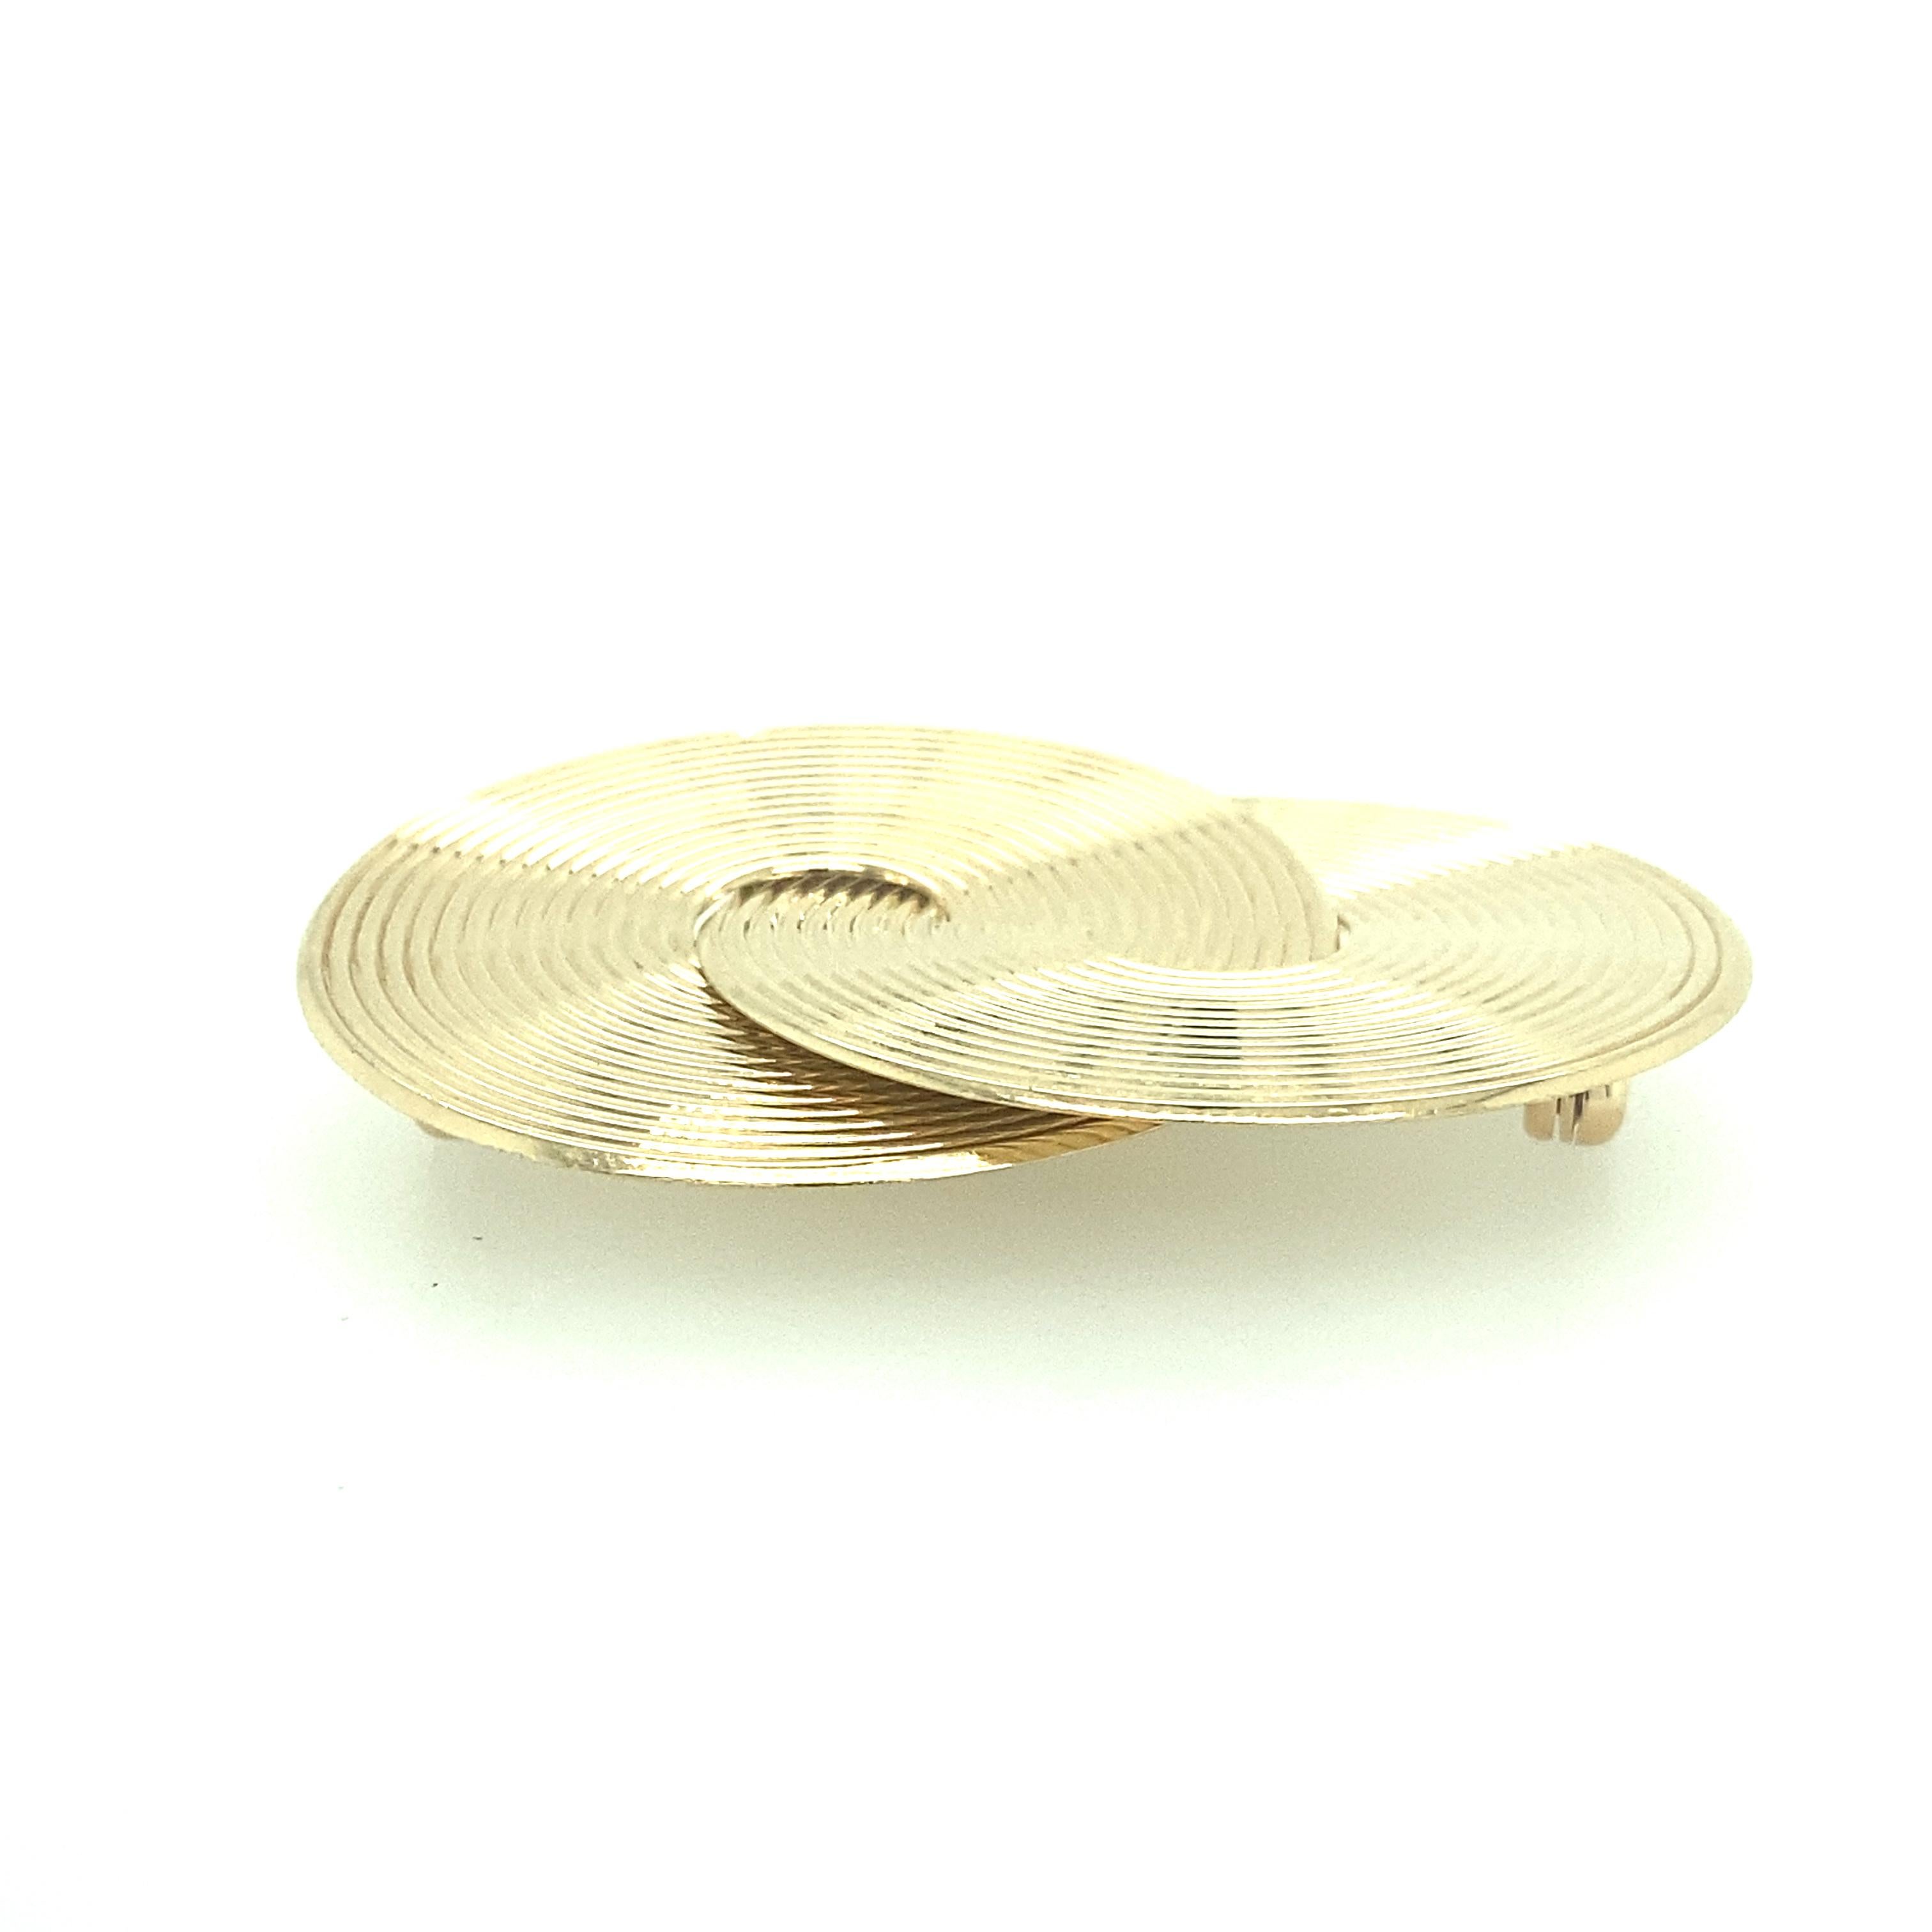 One 14 karat yellow gold estate twin circle pin measuring 1.5 x 1.75 inches and is complete with a double pin closure.